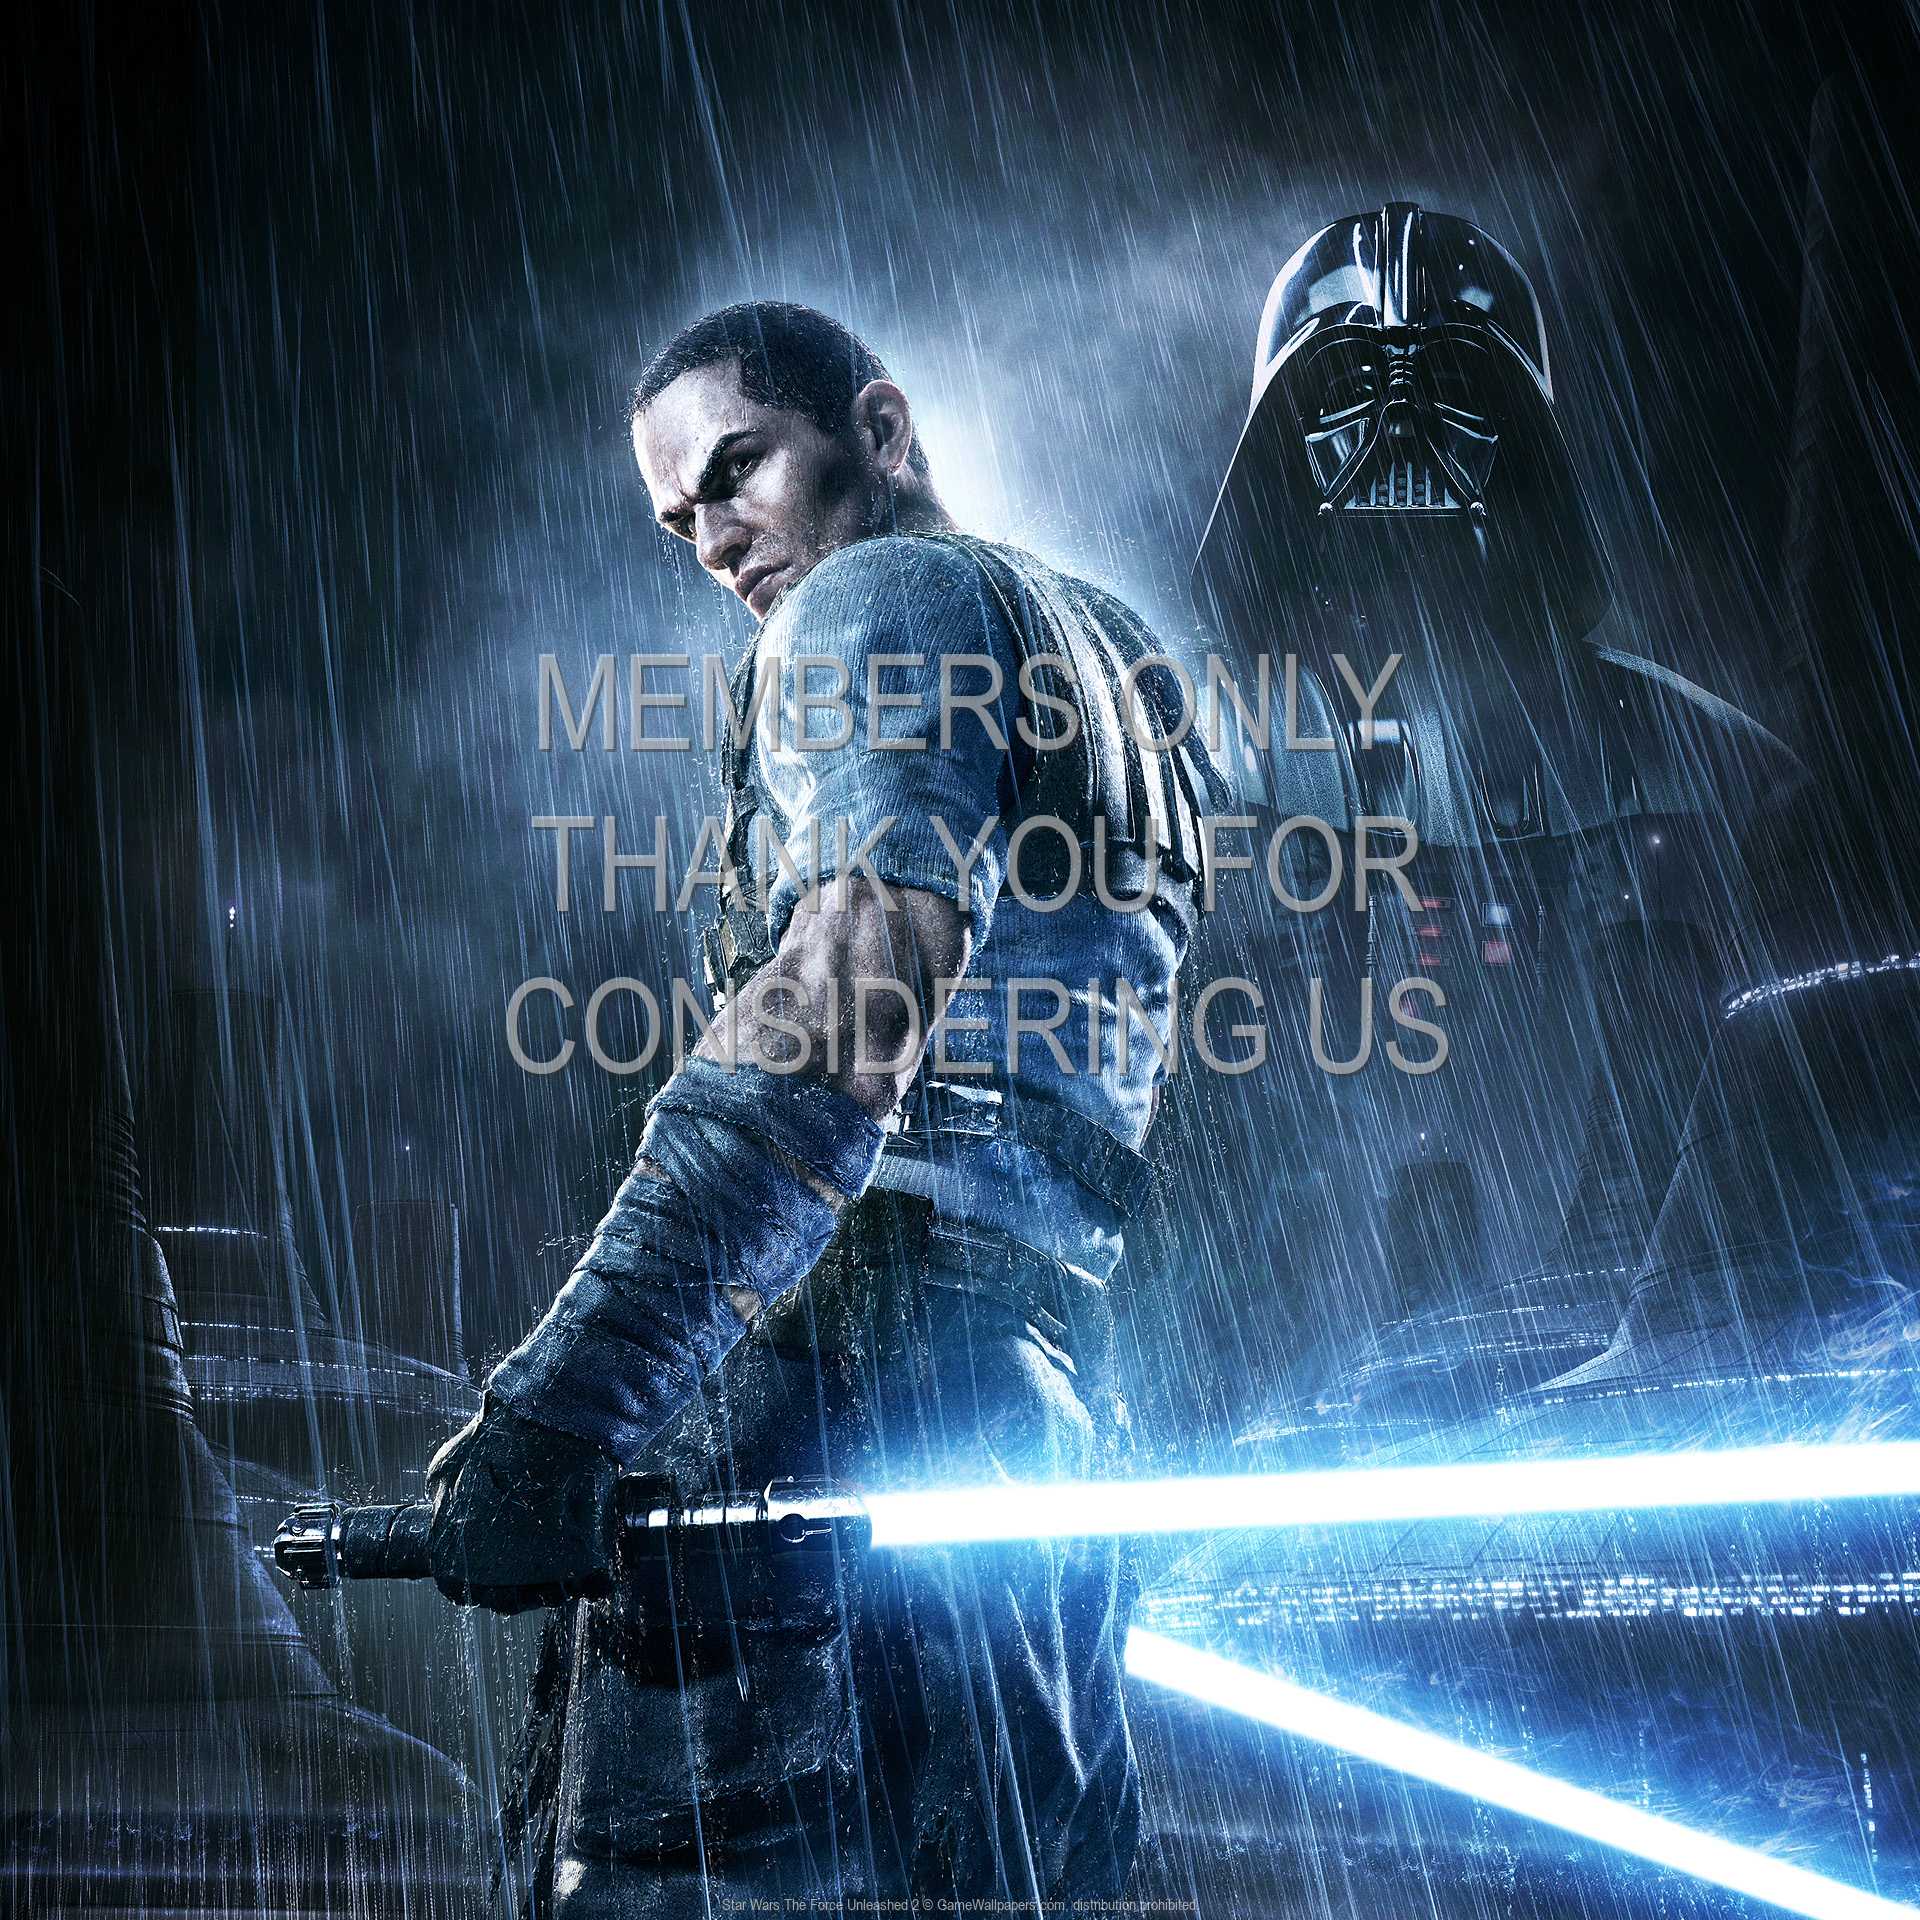 Star Wars: The Force Unleashed 2 1080p Horizontal Mobiele achtergrond 02